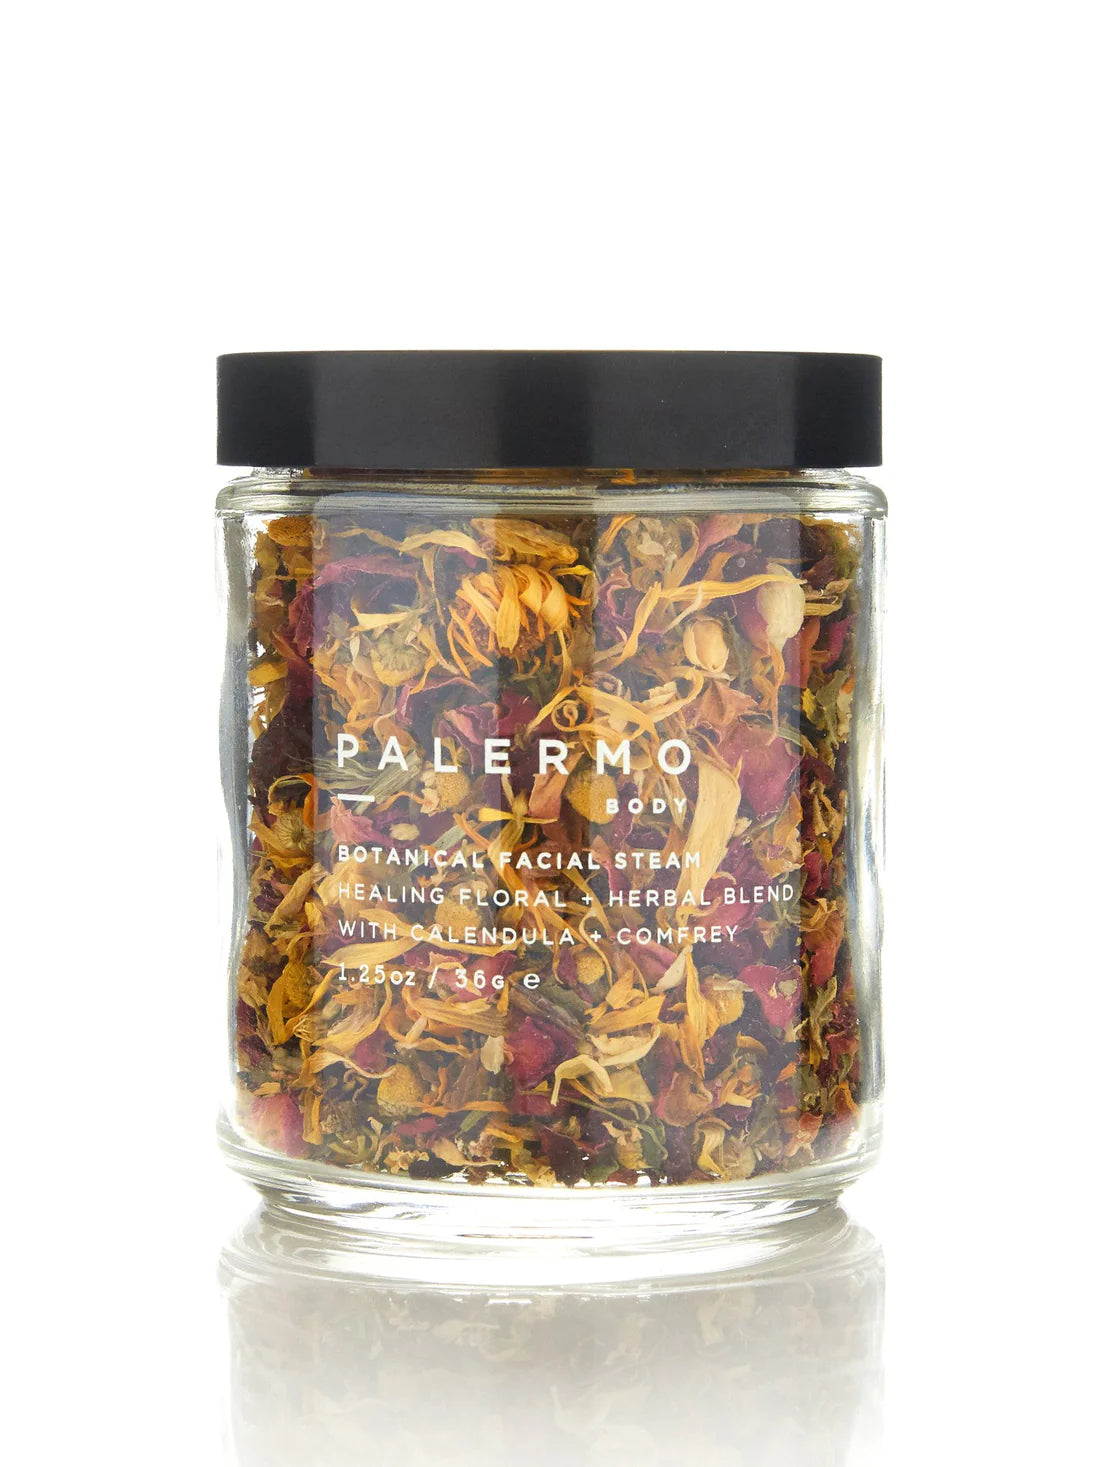 Botanical Facial Steam by Palermo